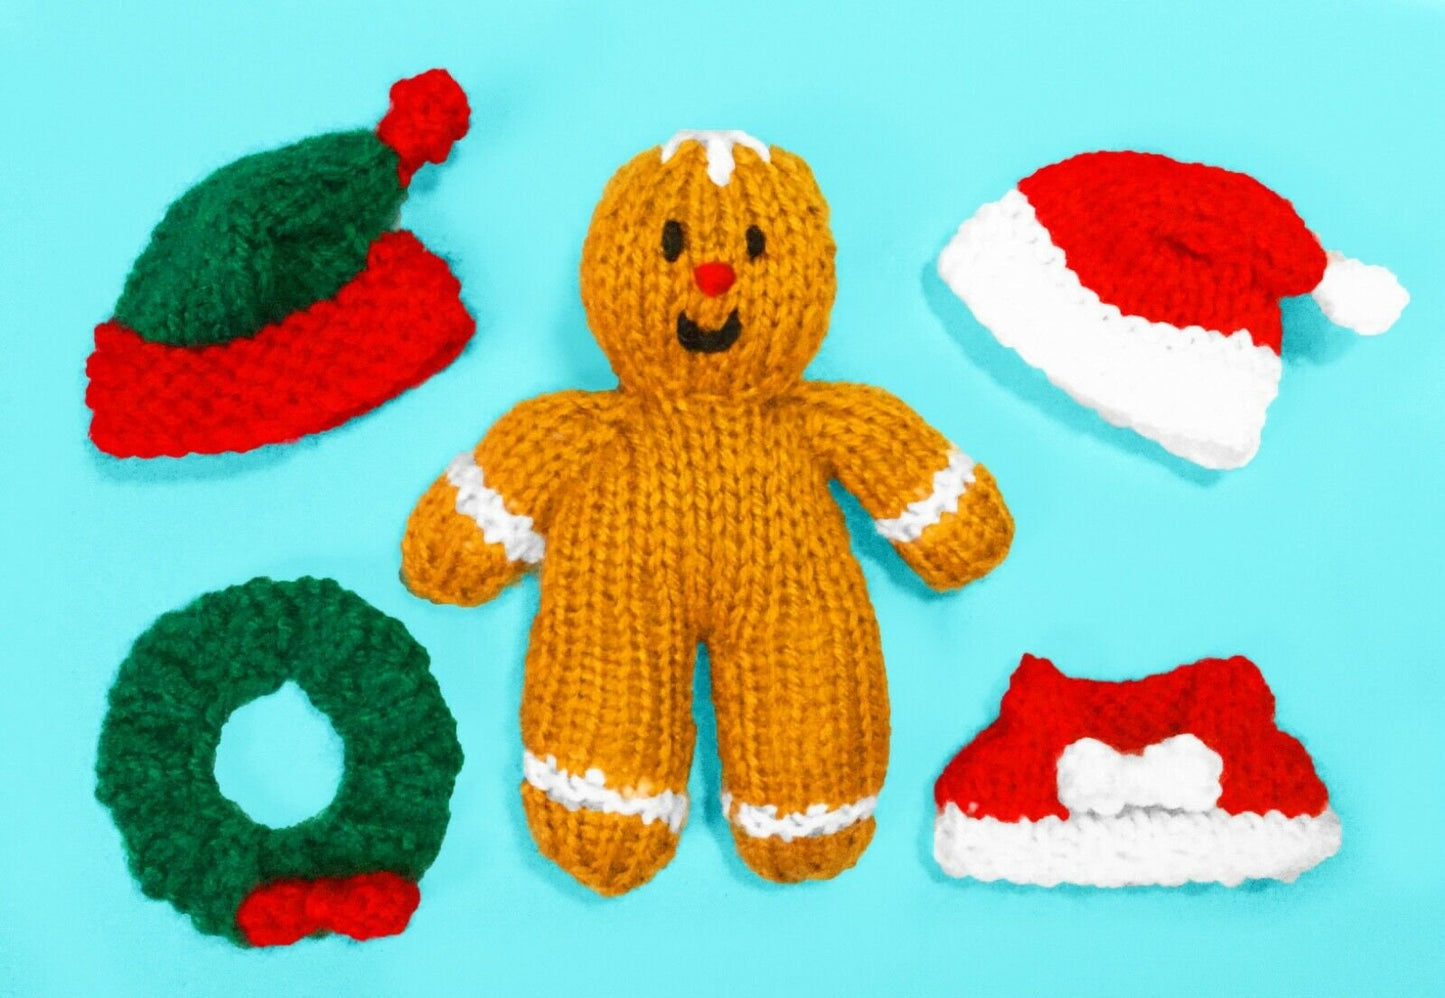 KNITTING PATTERN - Christmas Gingerbread Man Doll with Removable Clothes toy